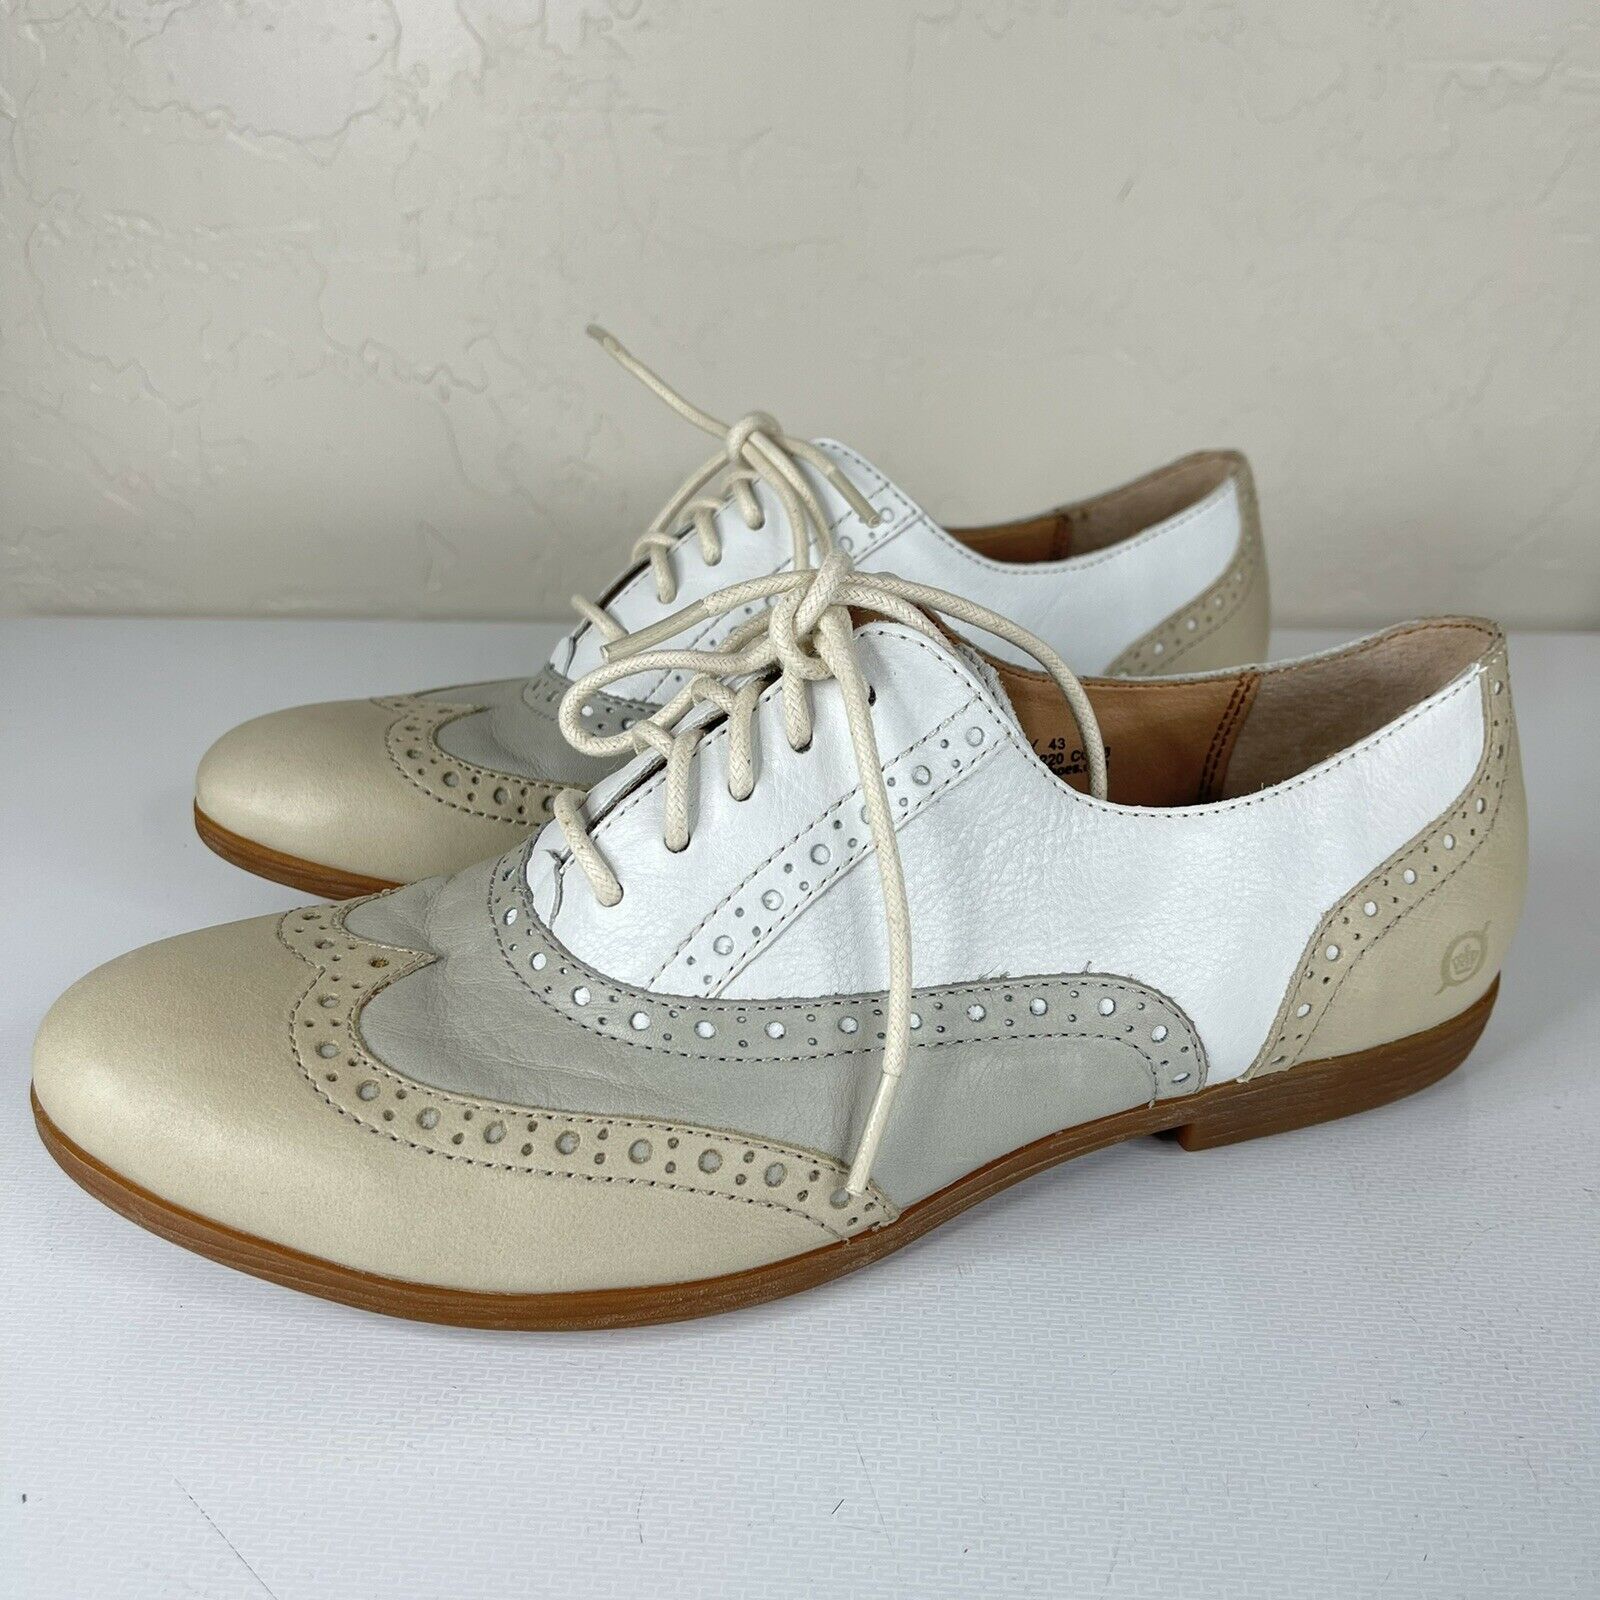 Born Oxfords Wingtip Lace Up Women Leather Dressy Casual Shoes Size 11